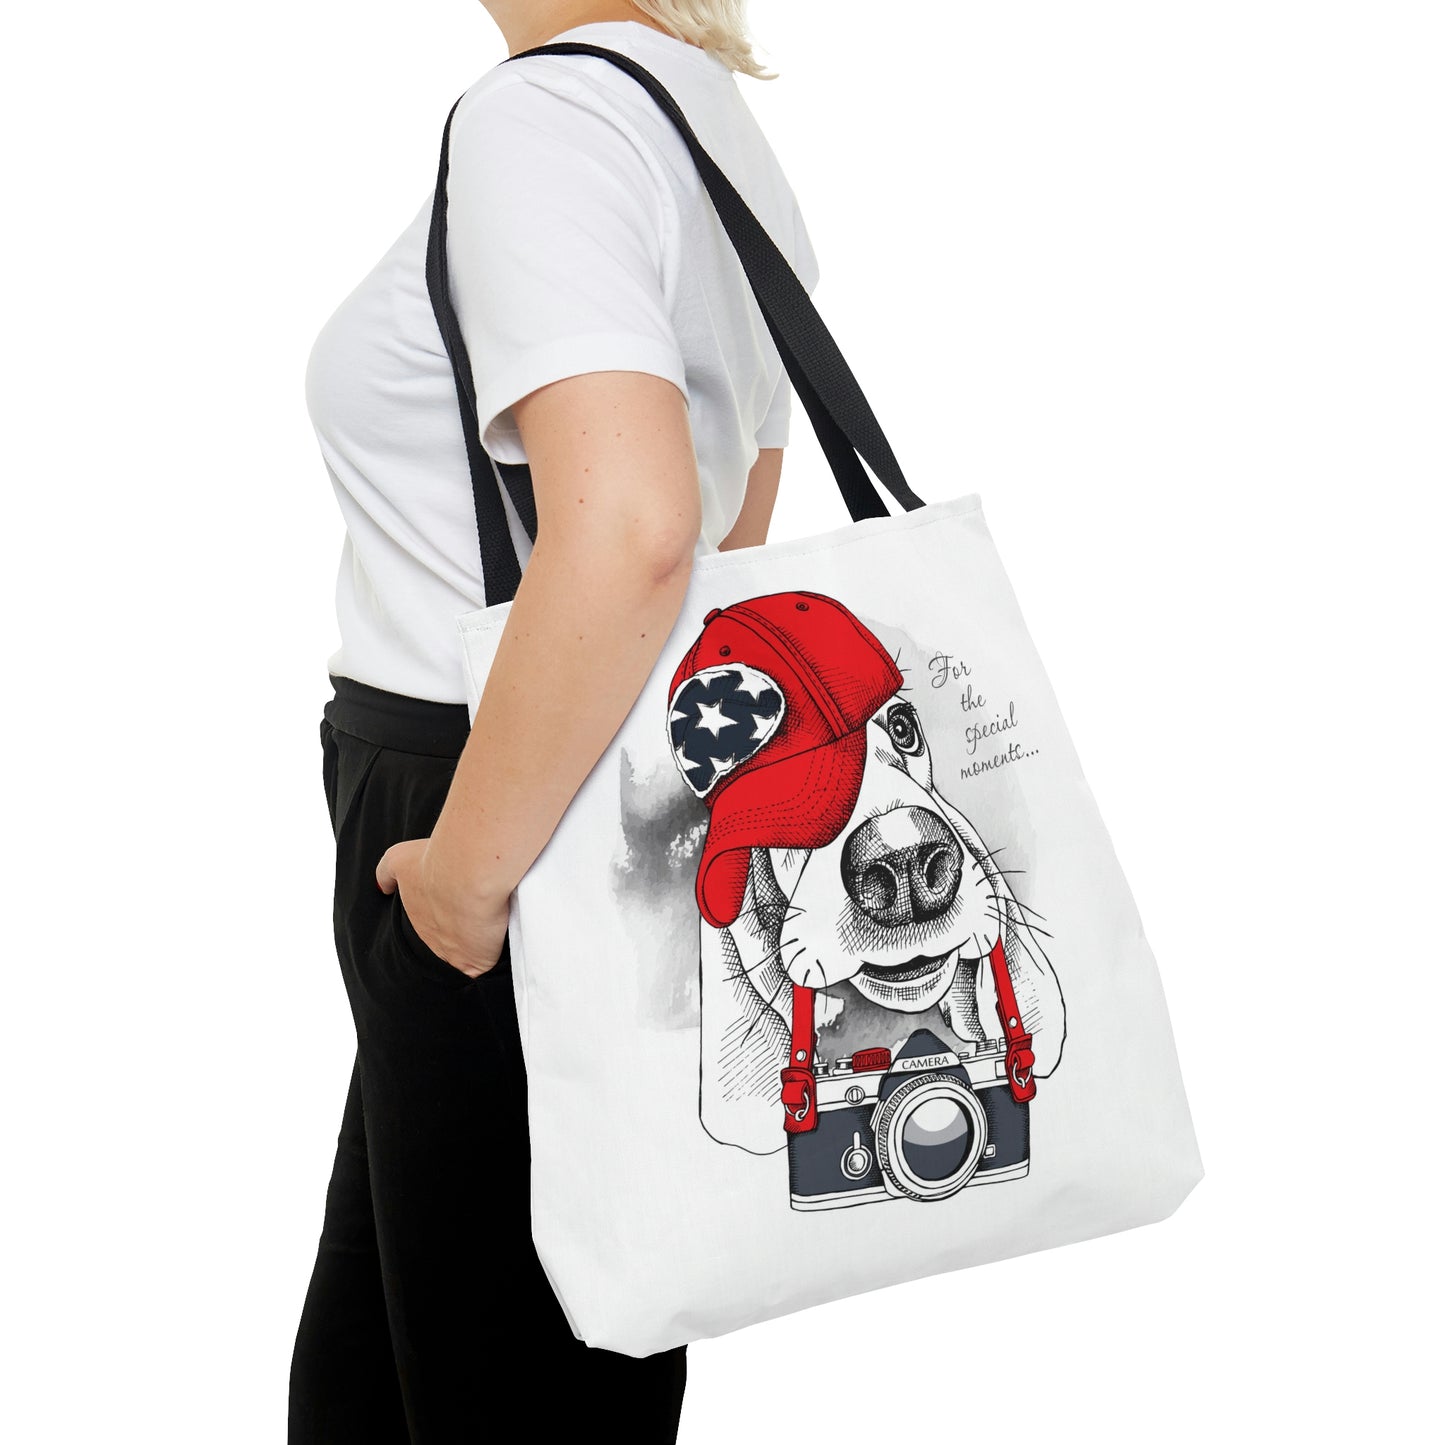 AOP Tote Bag "Dog Basset with a photo camera"